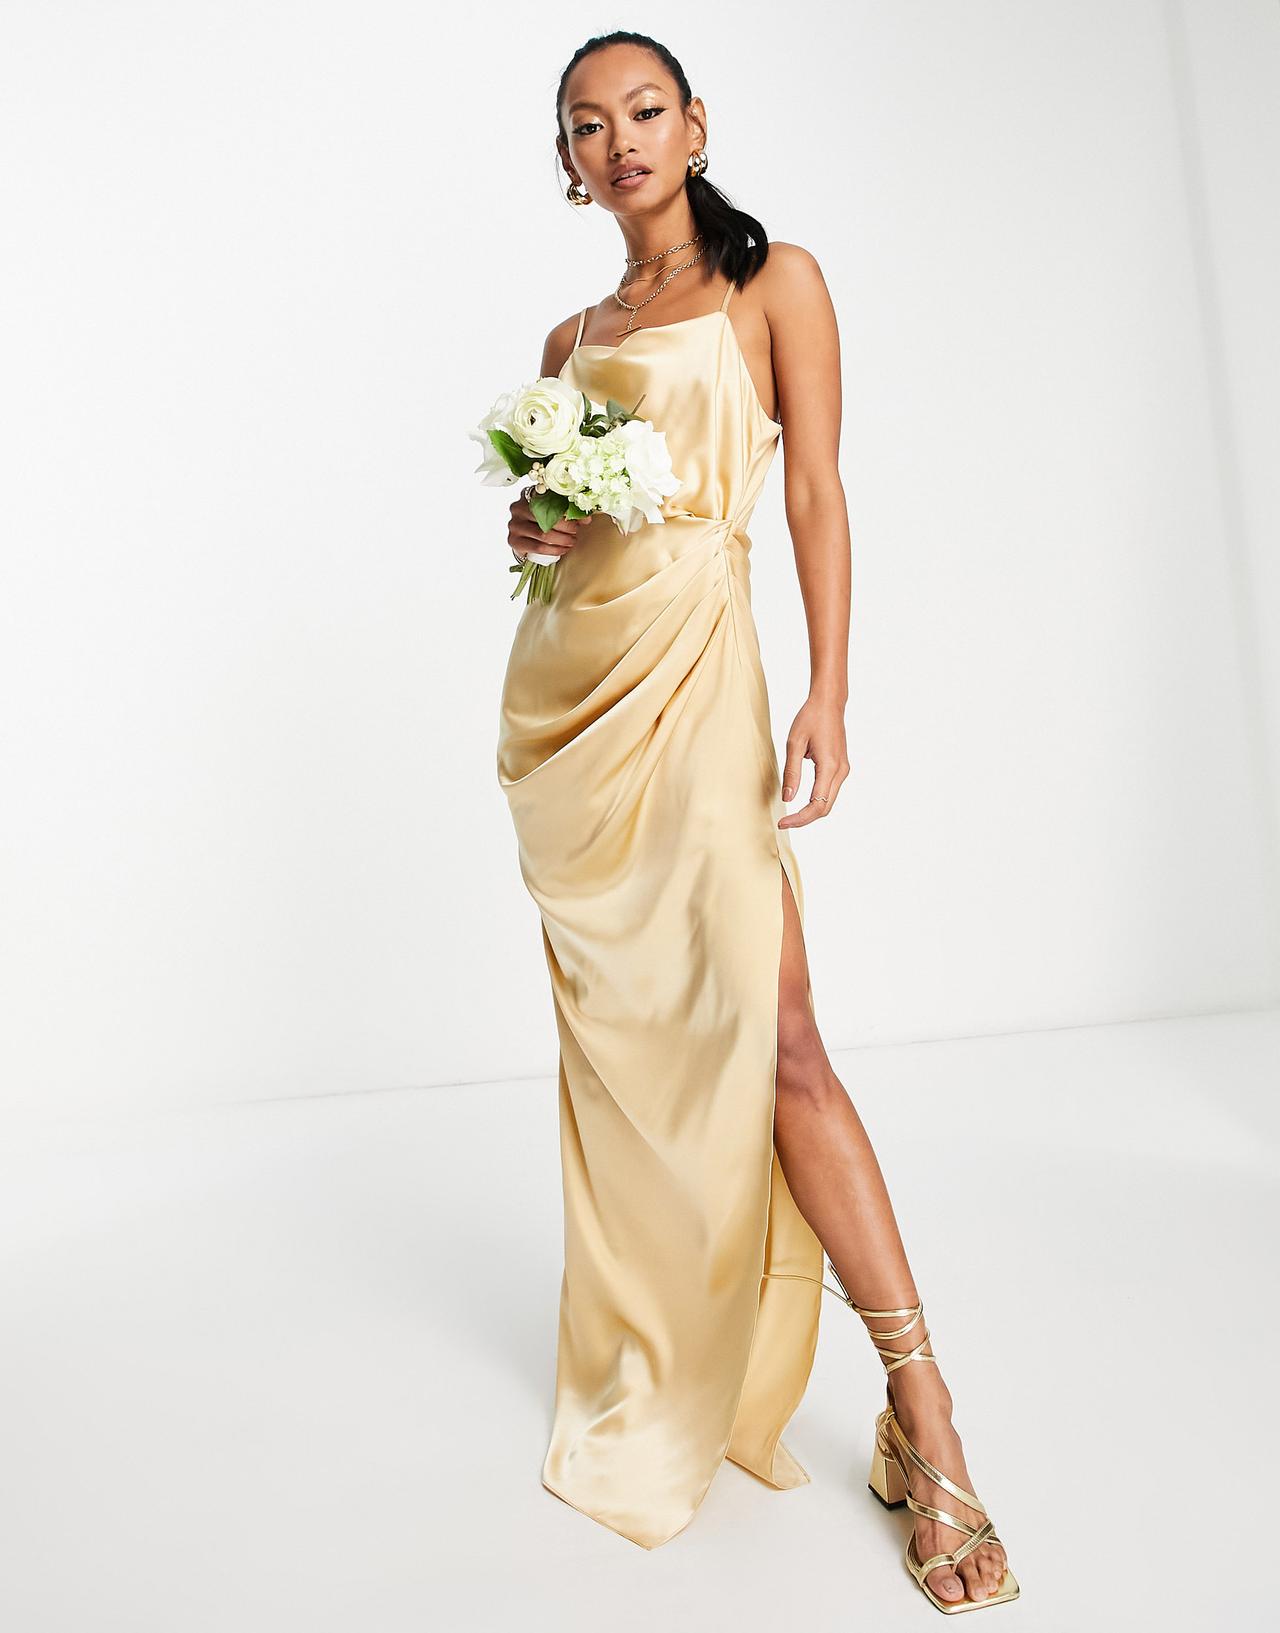 Gold Bridesmaid Dresses: 16 Glittering Gowns Your Maids Will Love 